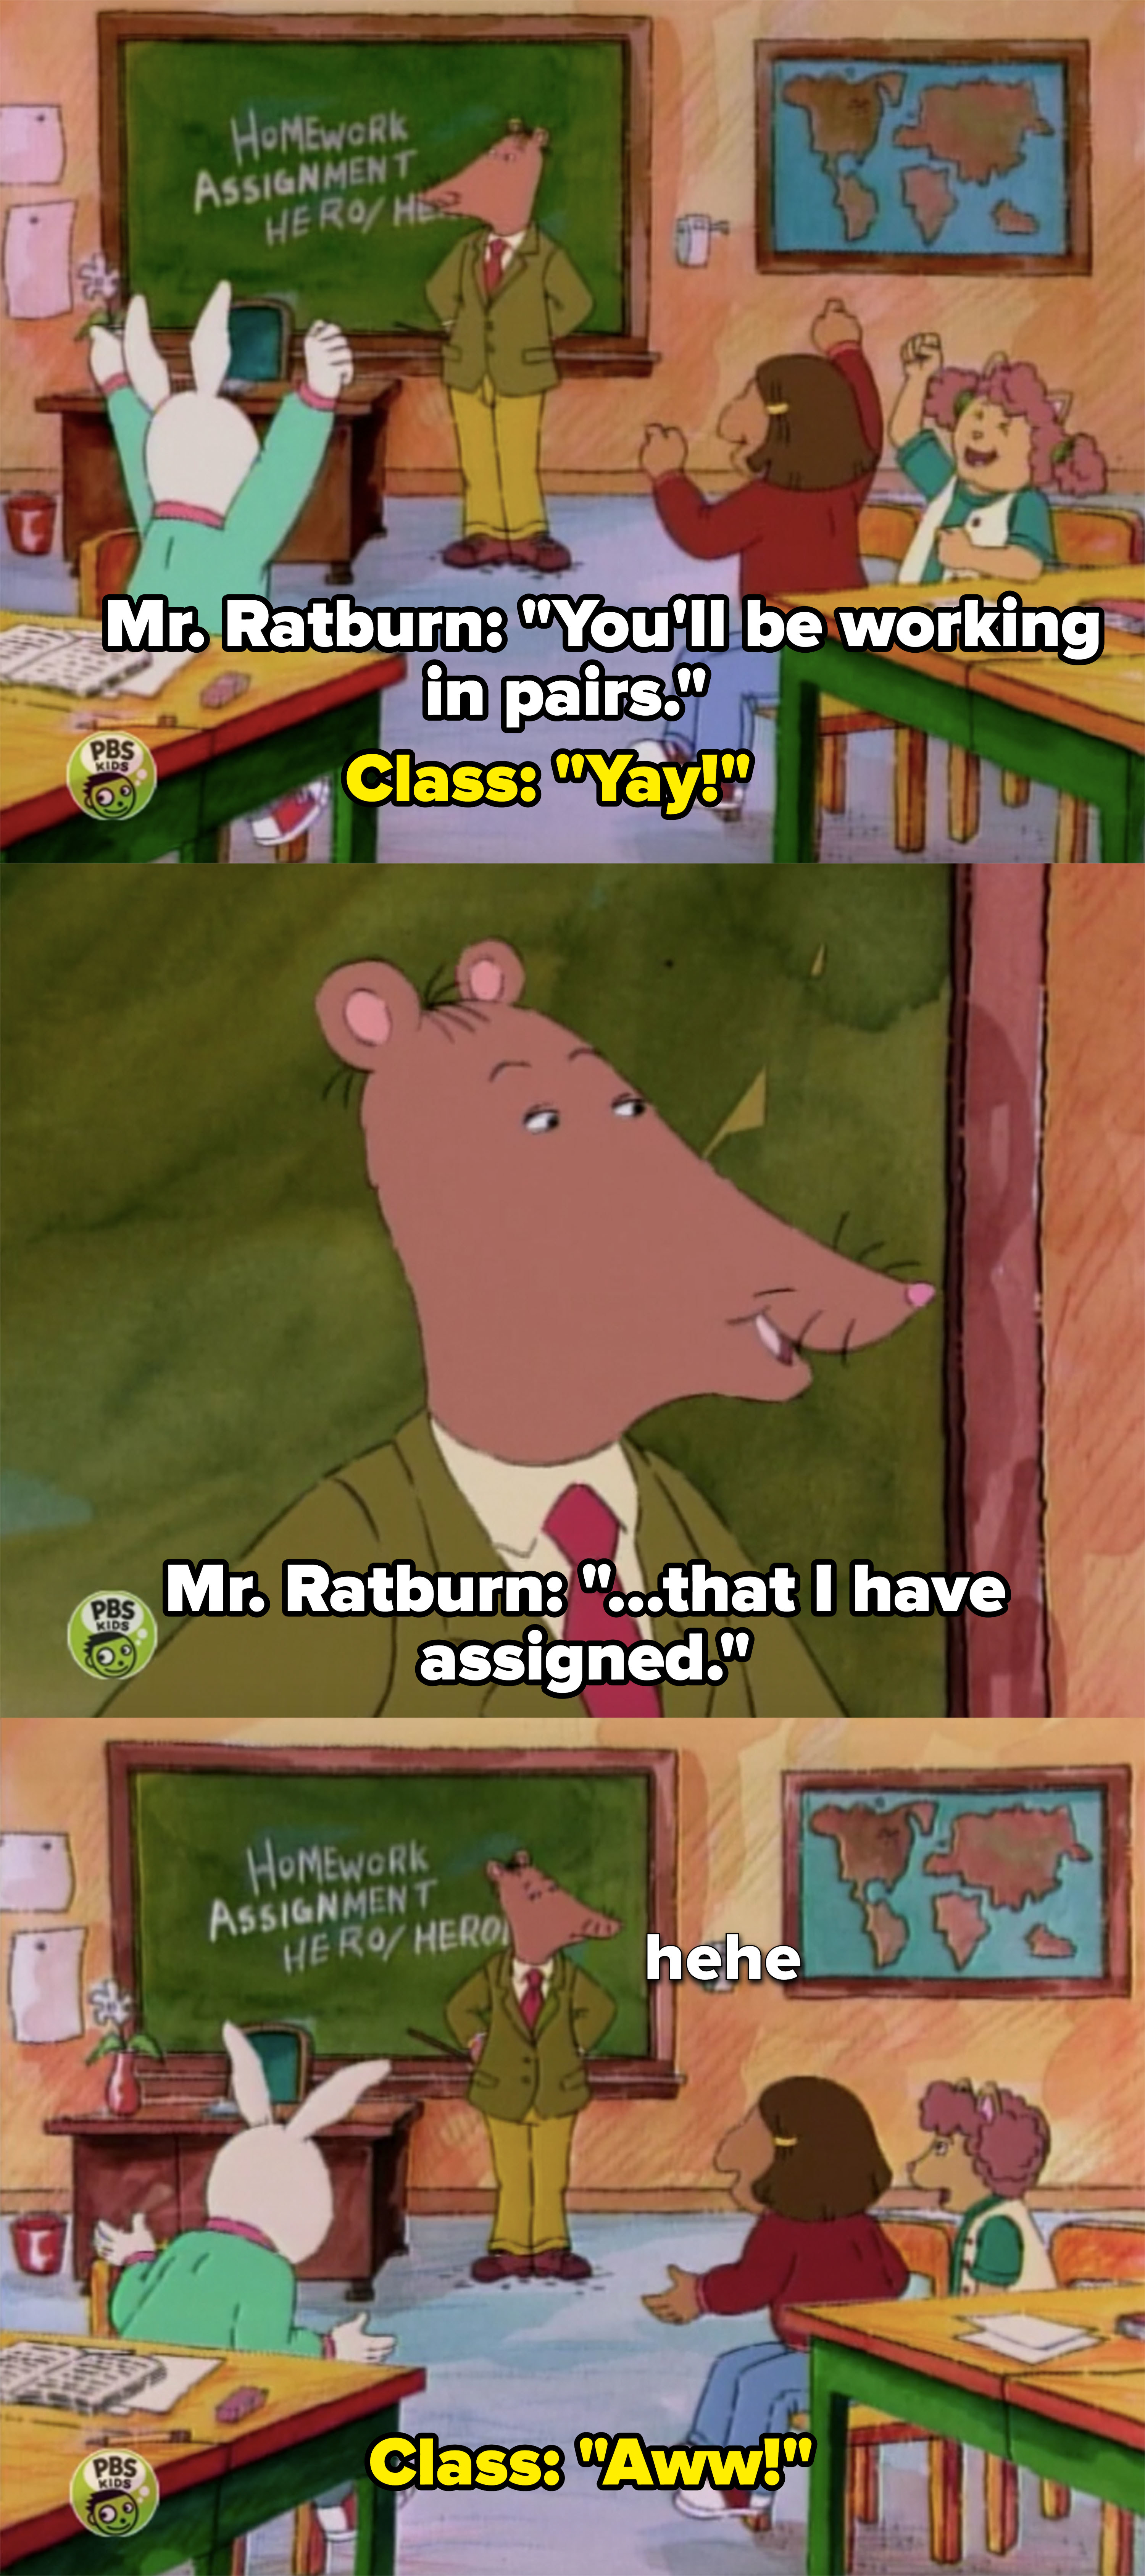 Mr. Ratburn: &quot;You&#x27;ll be working in pairs,&quot; Class: &quot;Yay!&quot; Mr. Ratburn: &quot;That I have assigned,&quot; Class: &quot;Aww&quot;